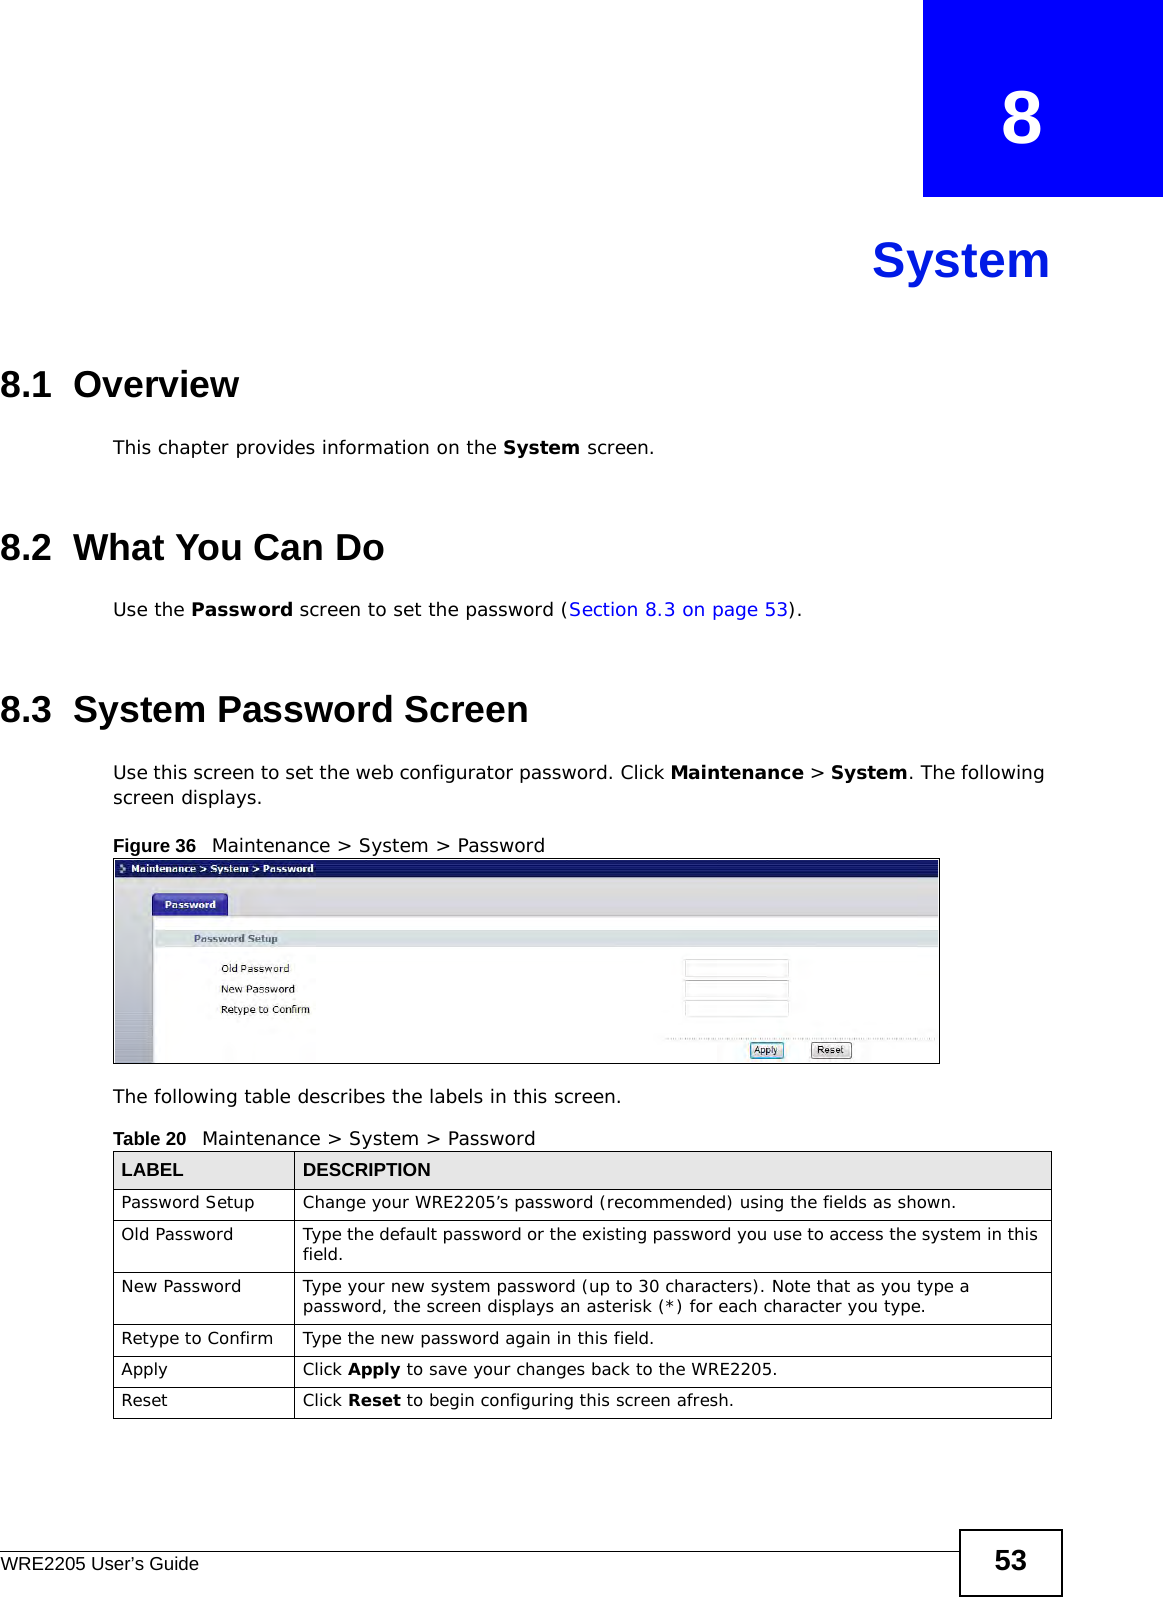 WRE2205 User’s Guide 53CHAPTER   8System8.1  OverviewThis chapter provides information on the System screen. 8.2  What You Can DoUse the Password screen to set the password (Section 8.3 on page 53).8.3  System Password Screen Use this screen to set the web configurator password. Click Maintenance &gt; System. The following screen displays.Figure 36   Maintenance &gt; System &gt; Password The following table describes the labels in this screen.Table 20   Maintenance &gt; System &gt; PasswordLABEL DESCRIPTIONPassword Setup Change your WRE2205’s password (recommended) using the fields as shown.Old Password Type the default password or the existing password you use to access the system in this field.New Password Type your new system password (up to 30 characters). Note that as you type a password, the screen displays an asterisk (*) for each character you type.Retype to Confirm Type the new password again in this field.Apply Click Apply to save your changes back to the WRE2205.Reset Click Reset to begin configuring this screen afresh.